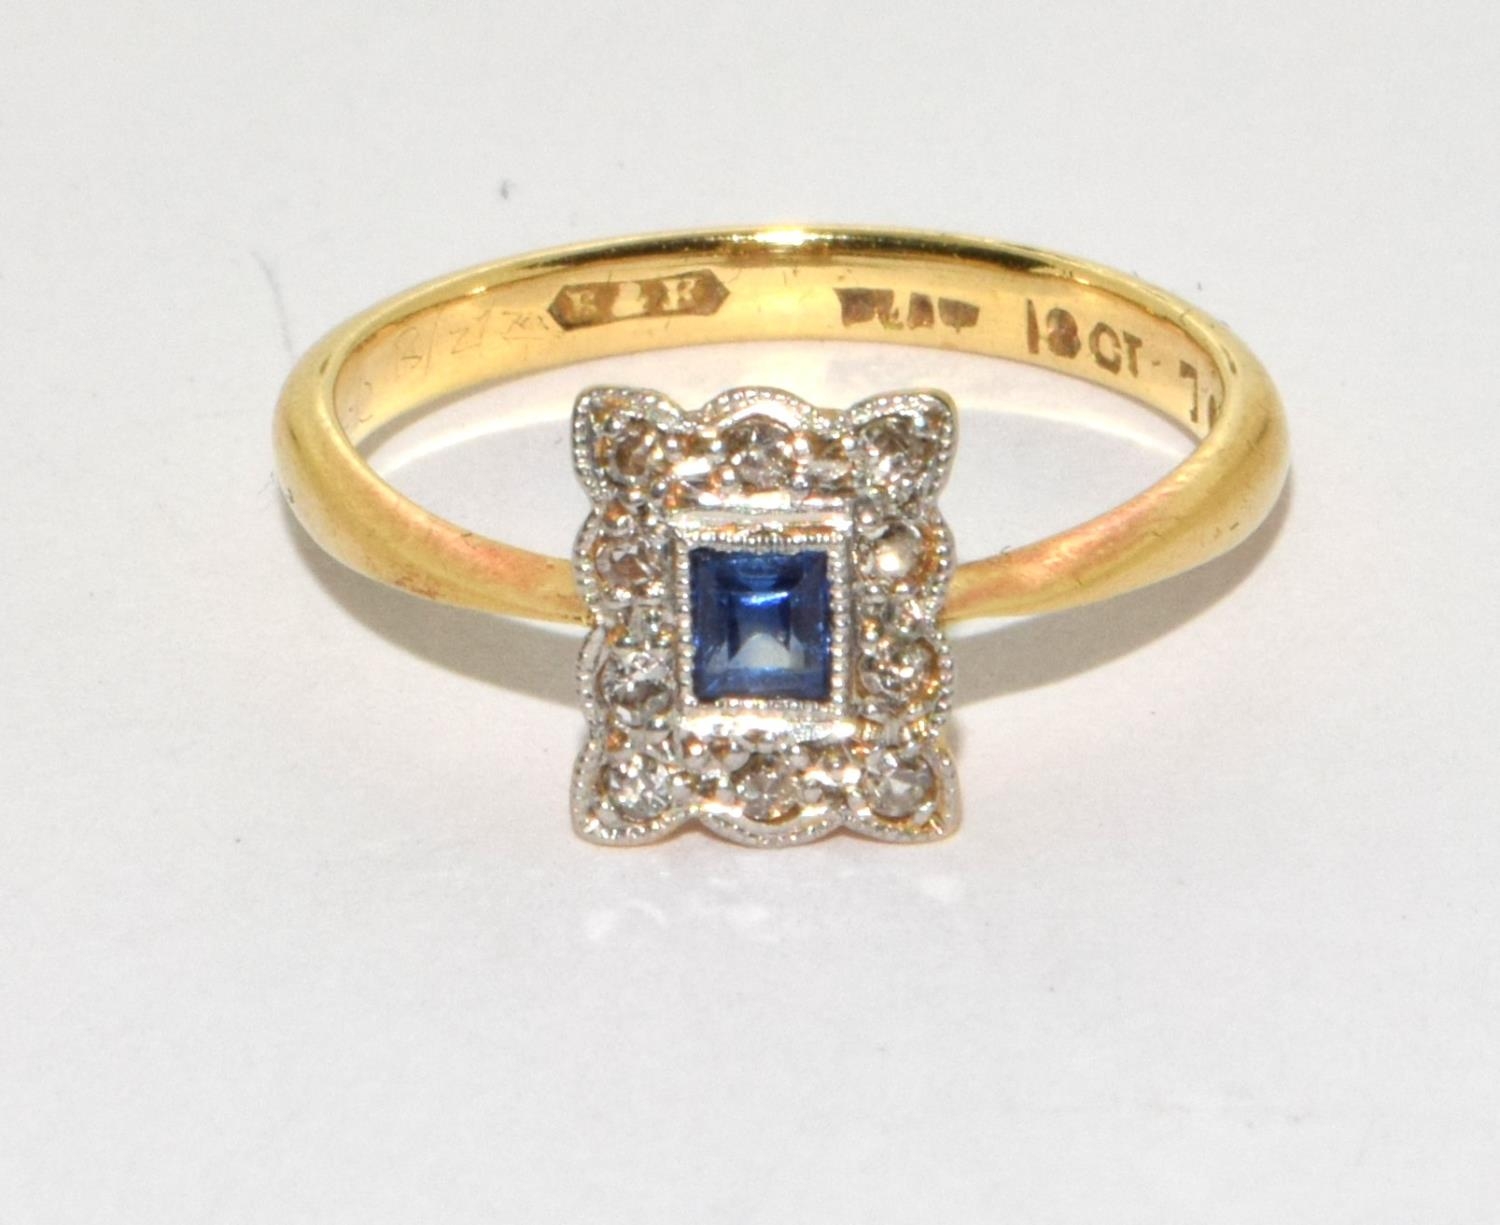 18ct gold Art Deco style ring set with central Sapphire surrounded by Diamonds in a square setting - Image 4 of 4